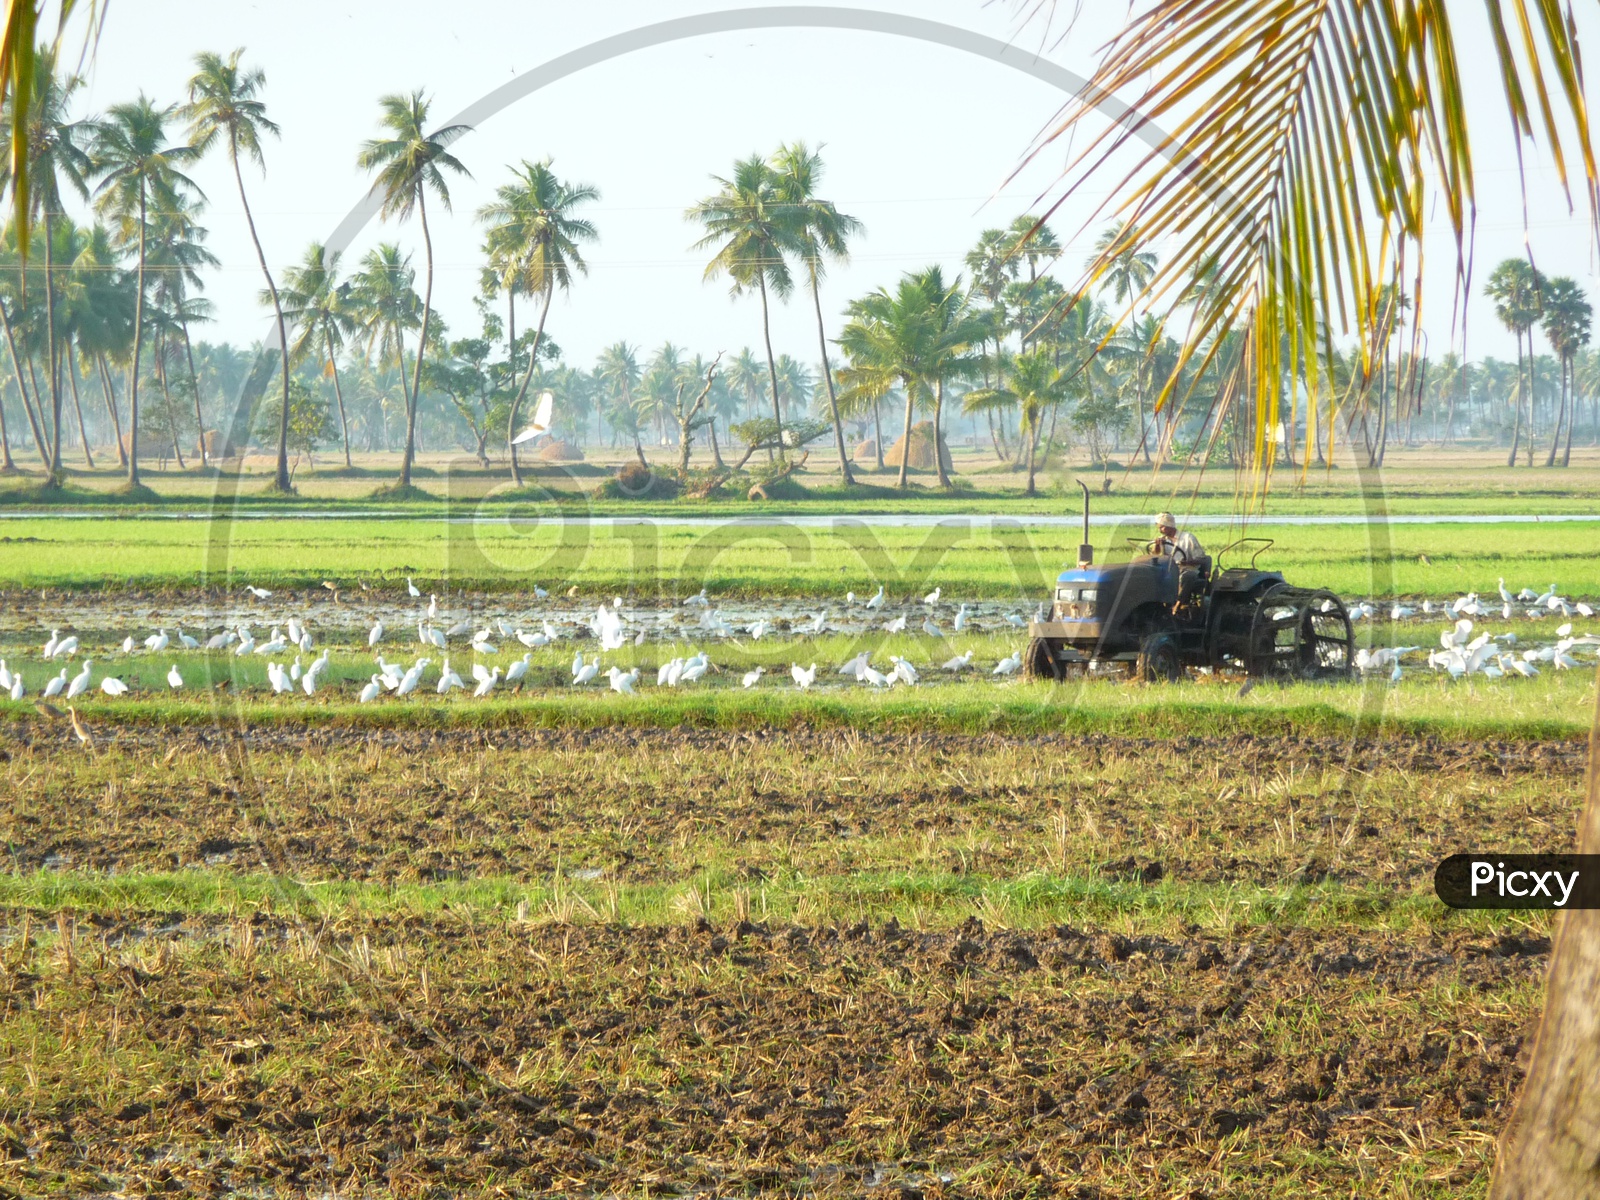 Tractor in Agriculture Fields